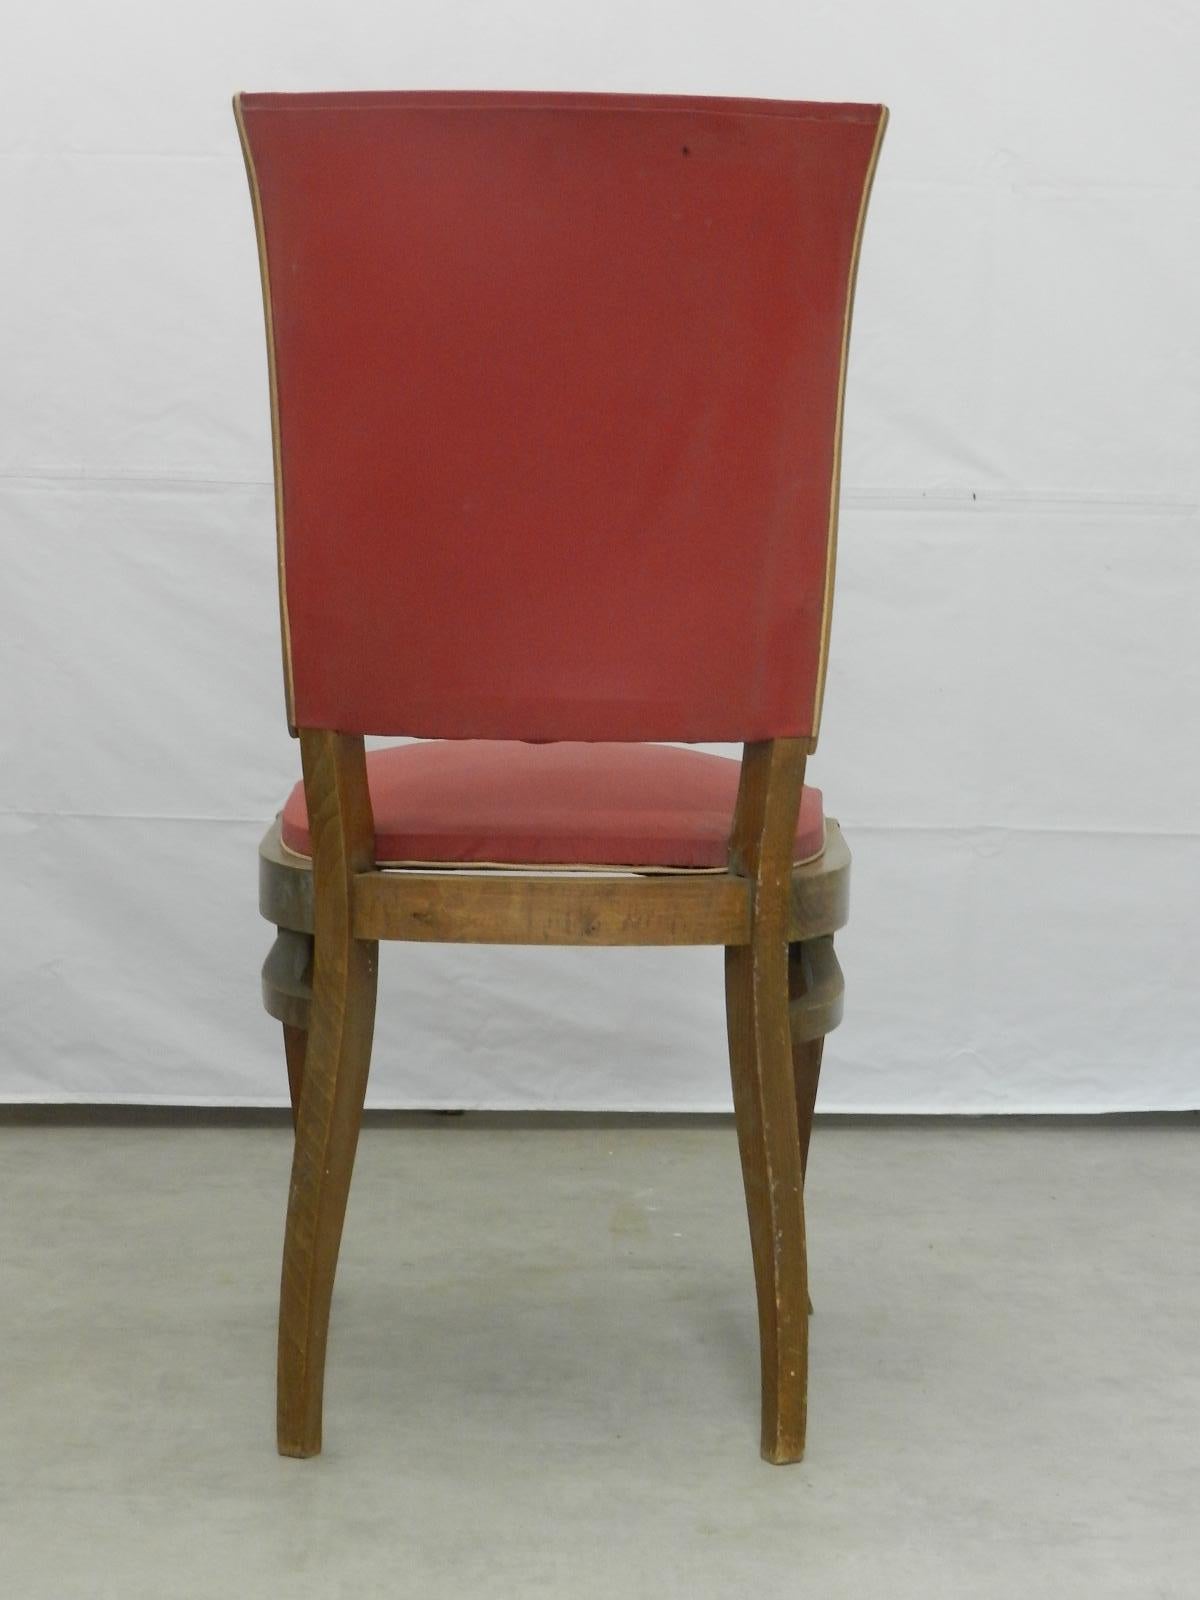 Four Art Deco Dining Chairs French to Recover / Restore, circa 1930 In Good Condition For Sale In Labrit, Landes